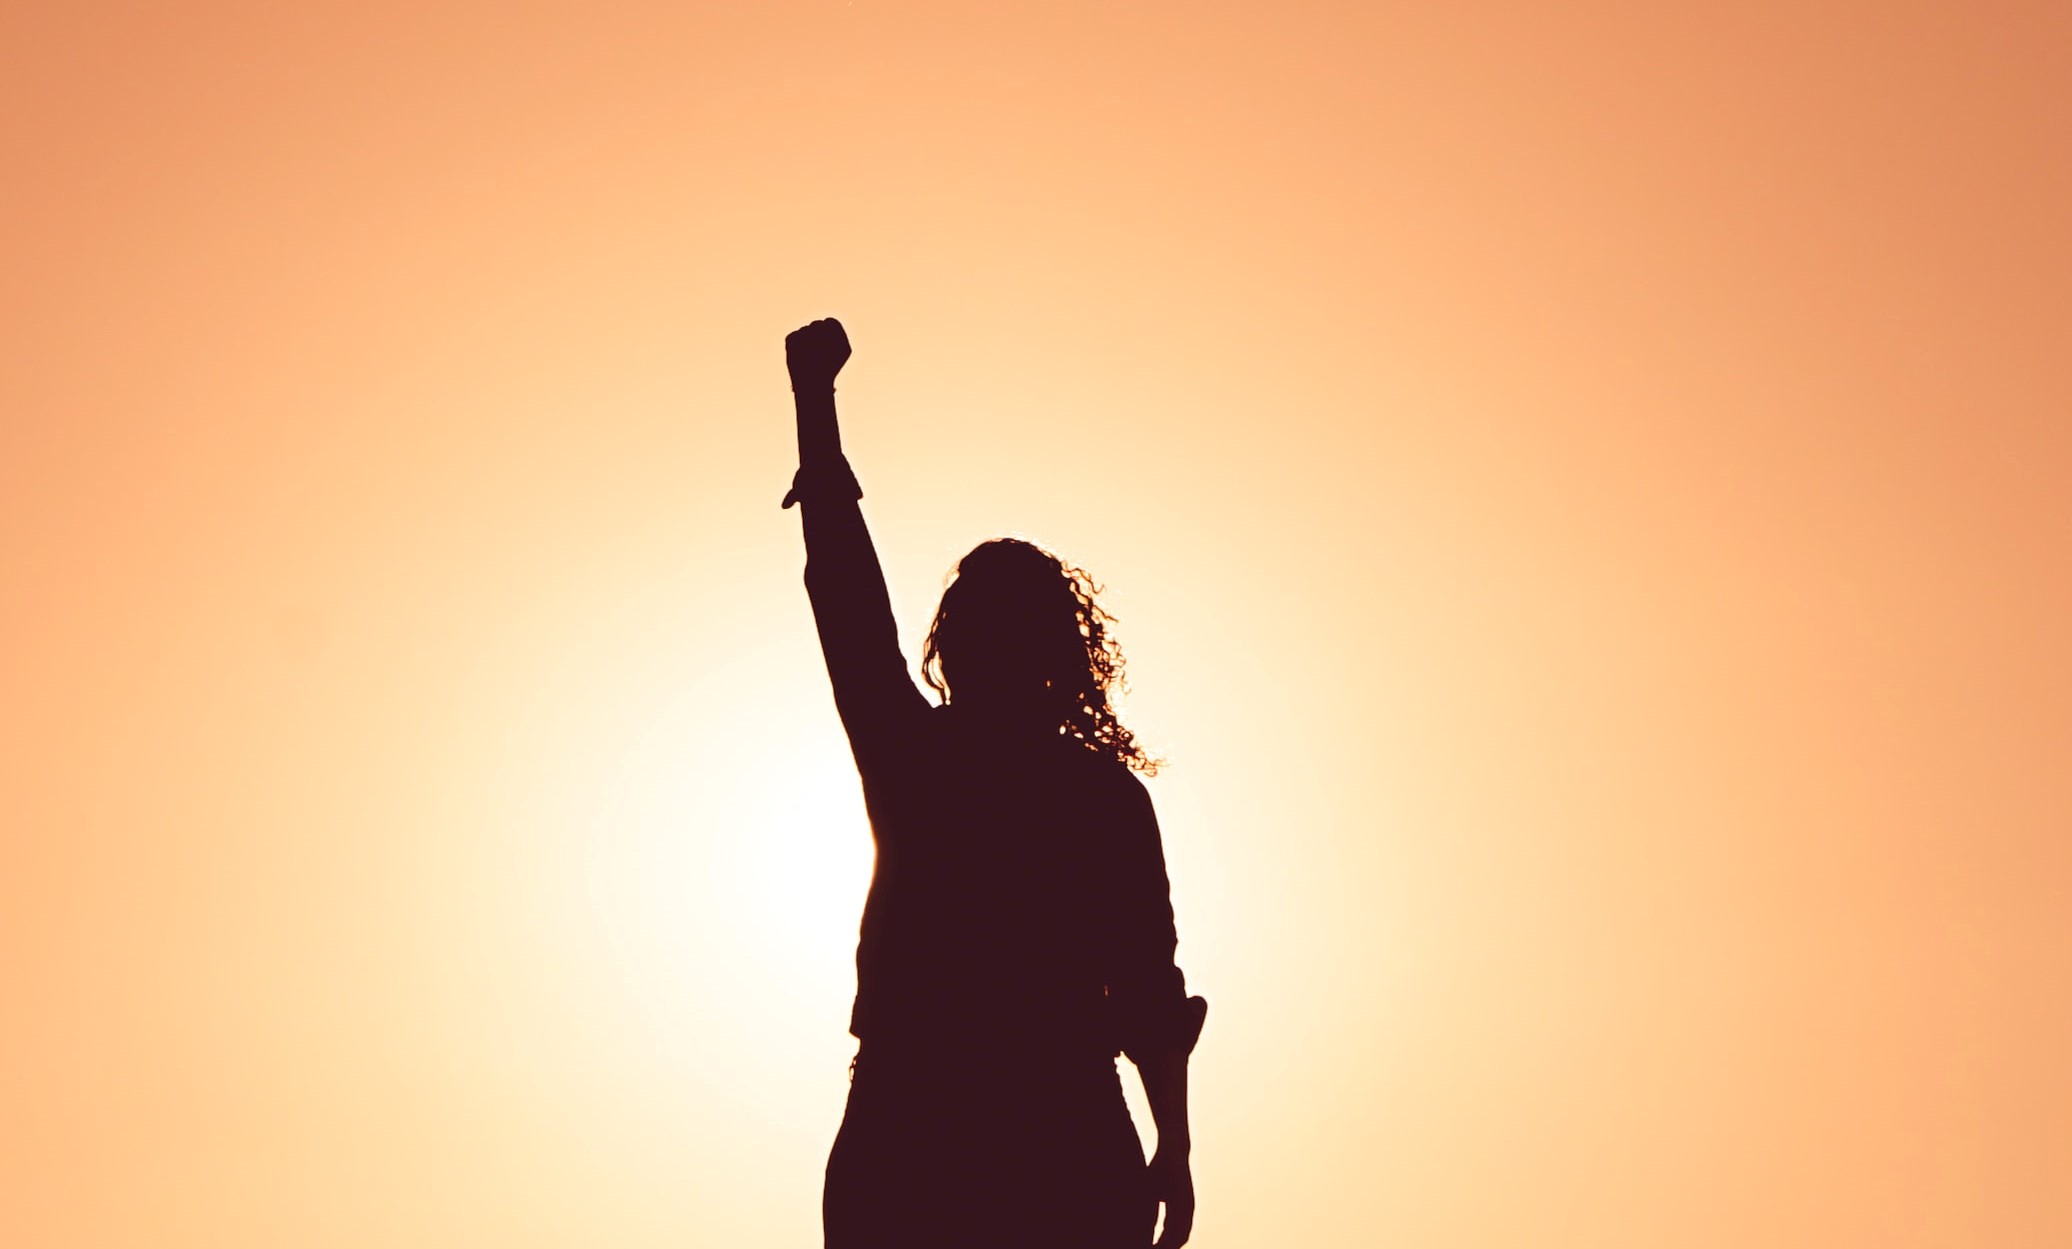 Silhouette of a woman raising her fist against an orange backdrop